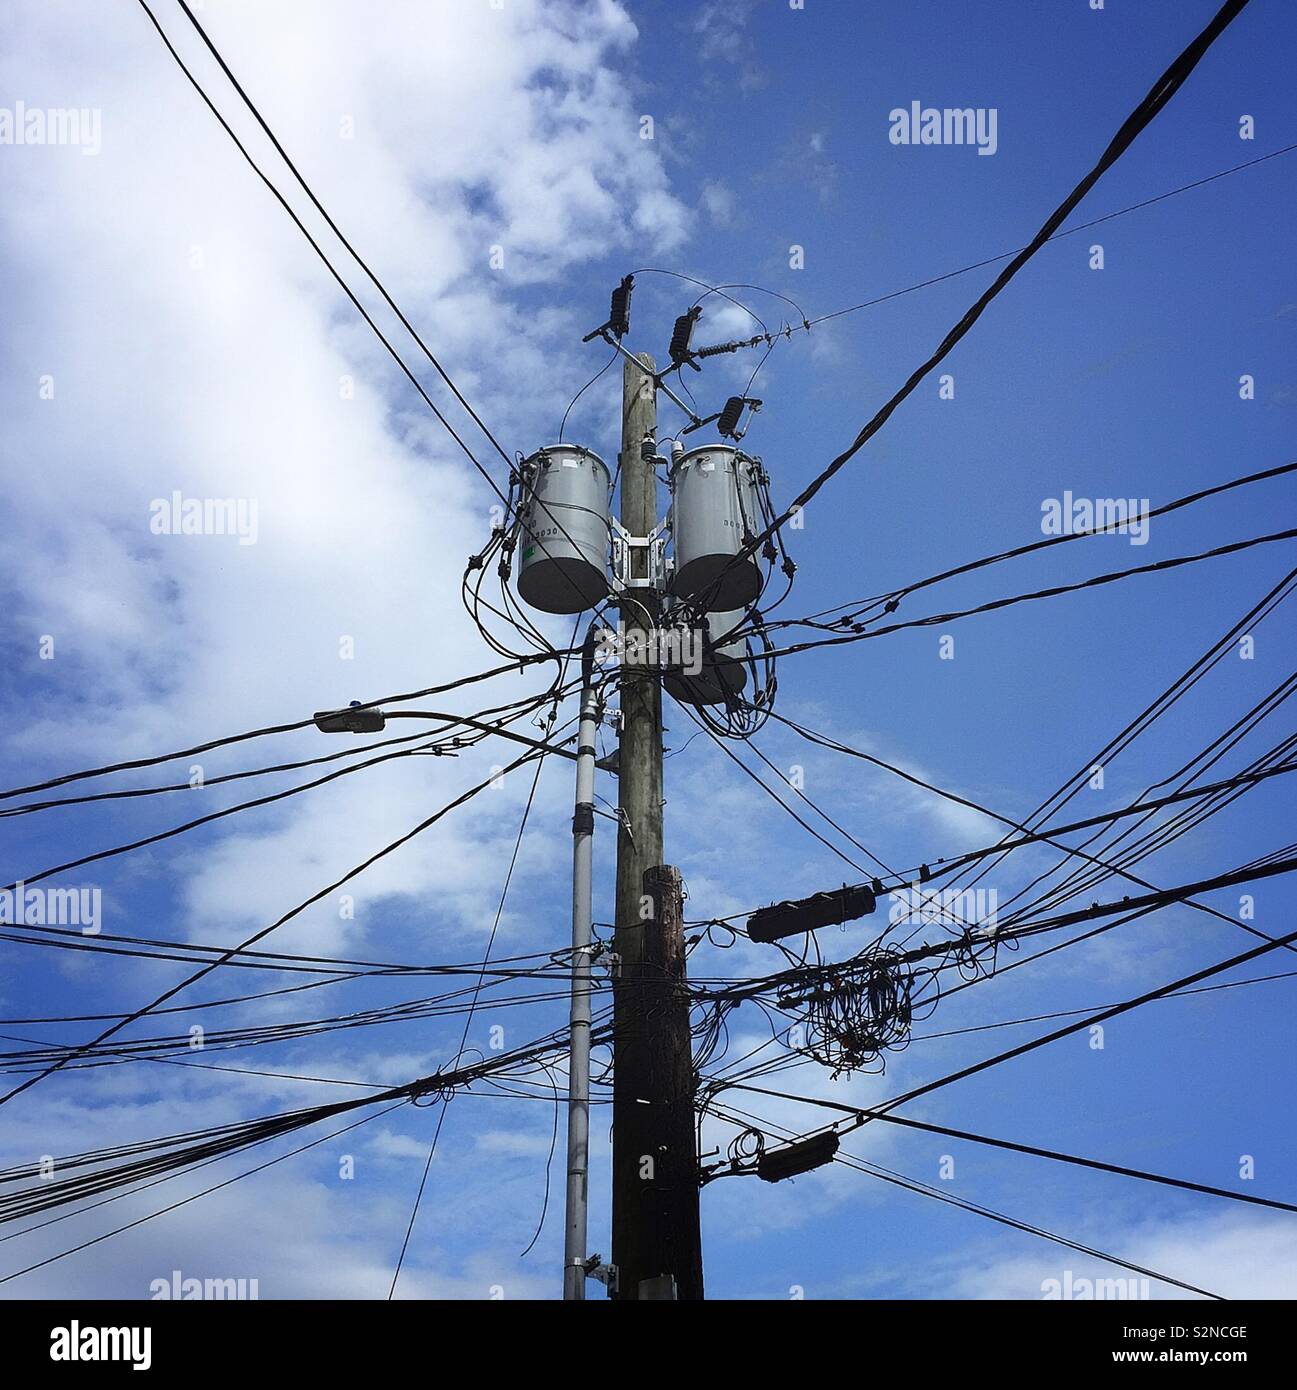 Utility pole with telephone and electric wires stretching in all directions  Stock Photo - Alamy